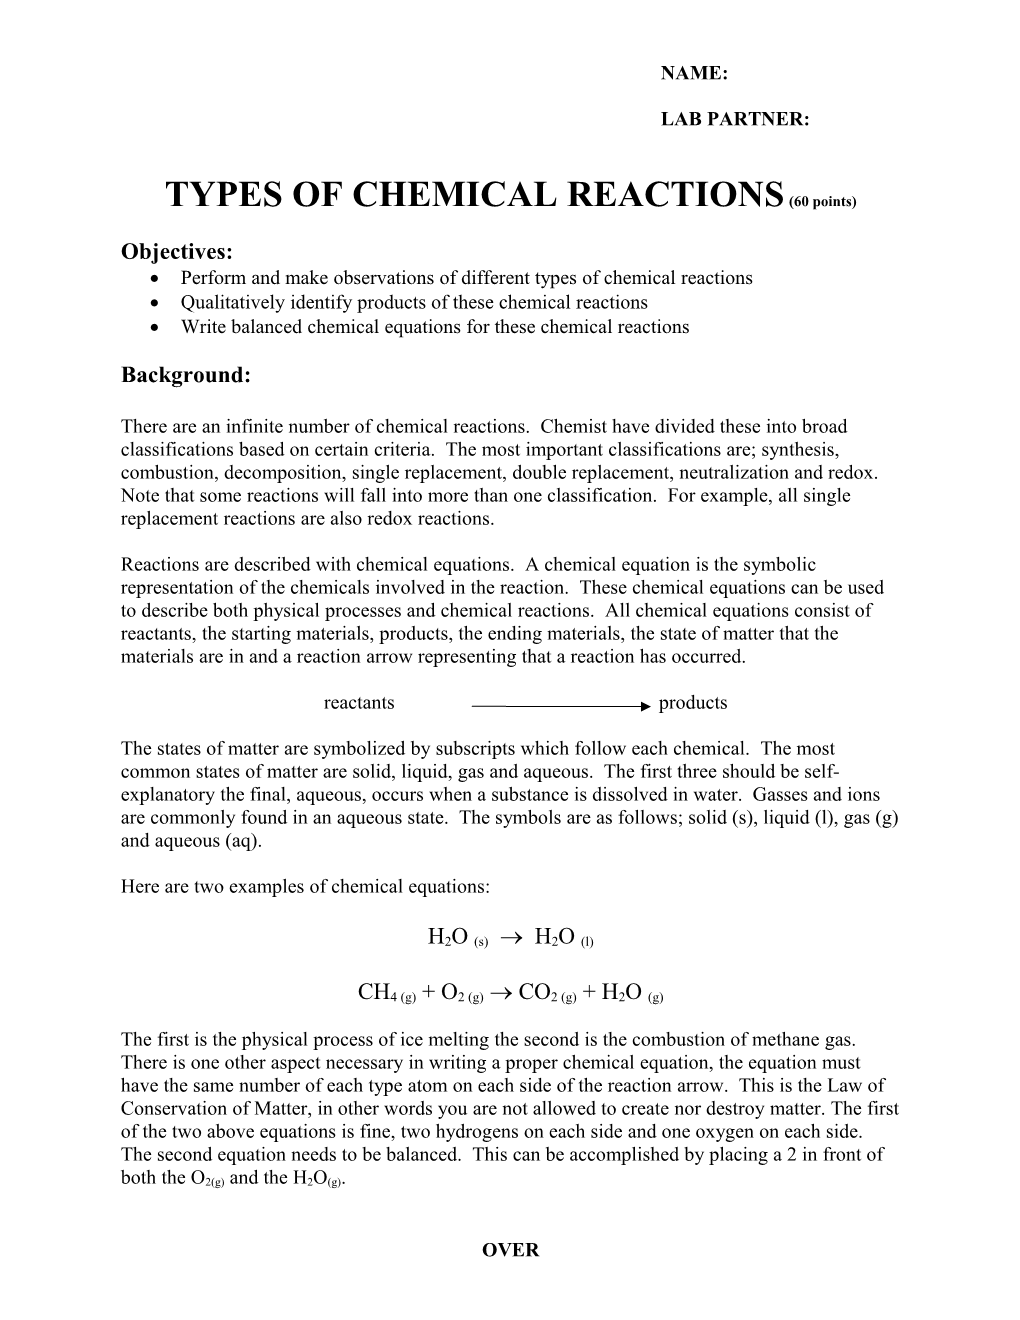 TYPES of CHEMICAL REACTIONS (60 Points)